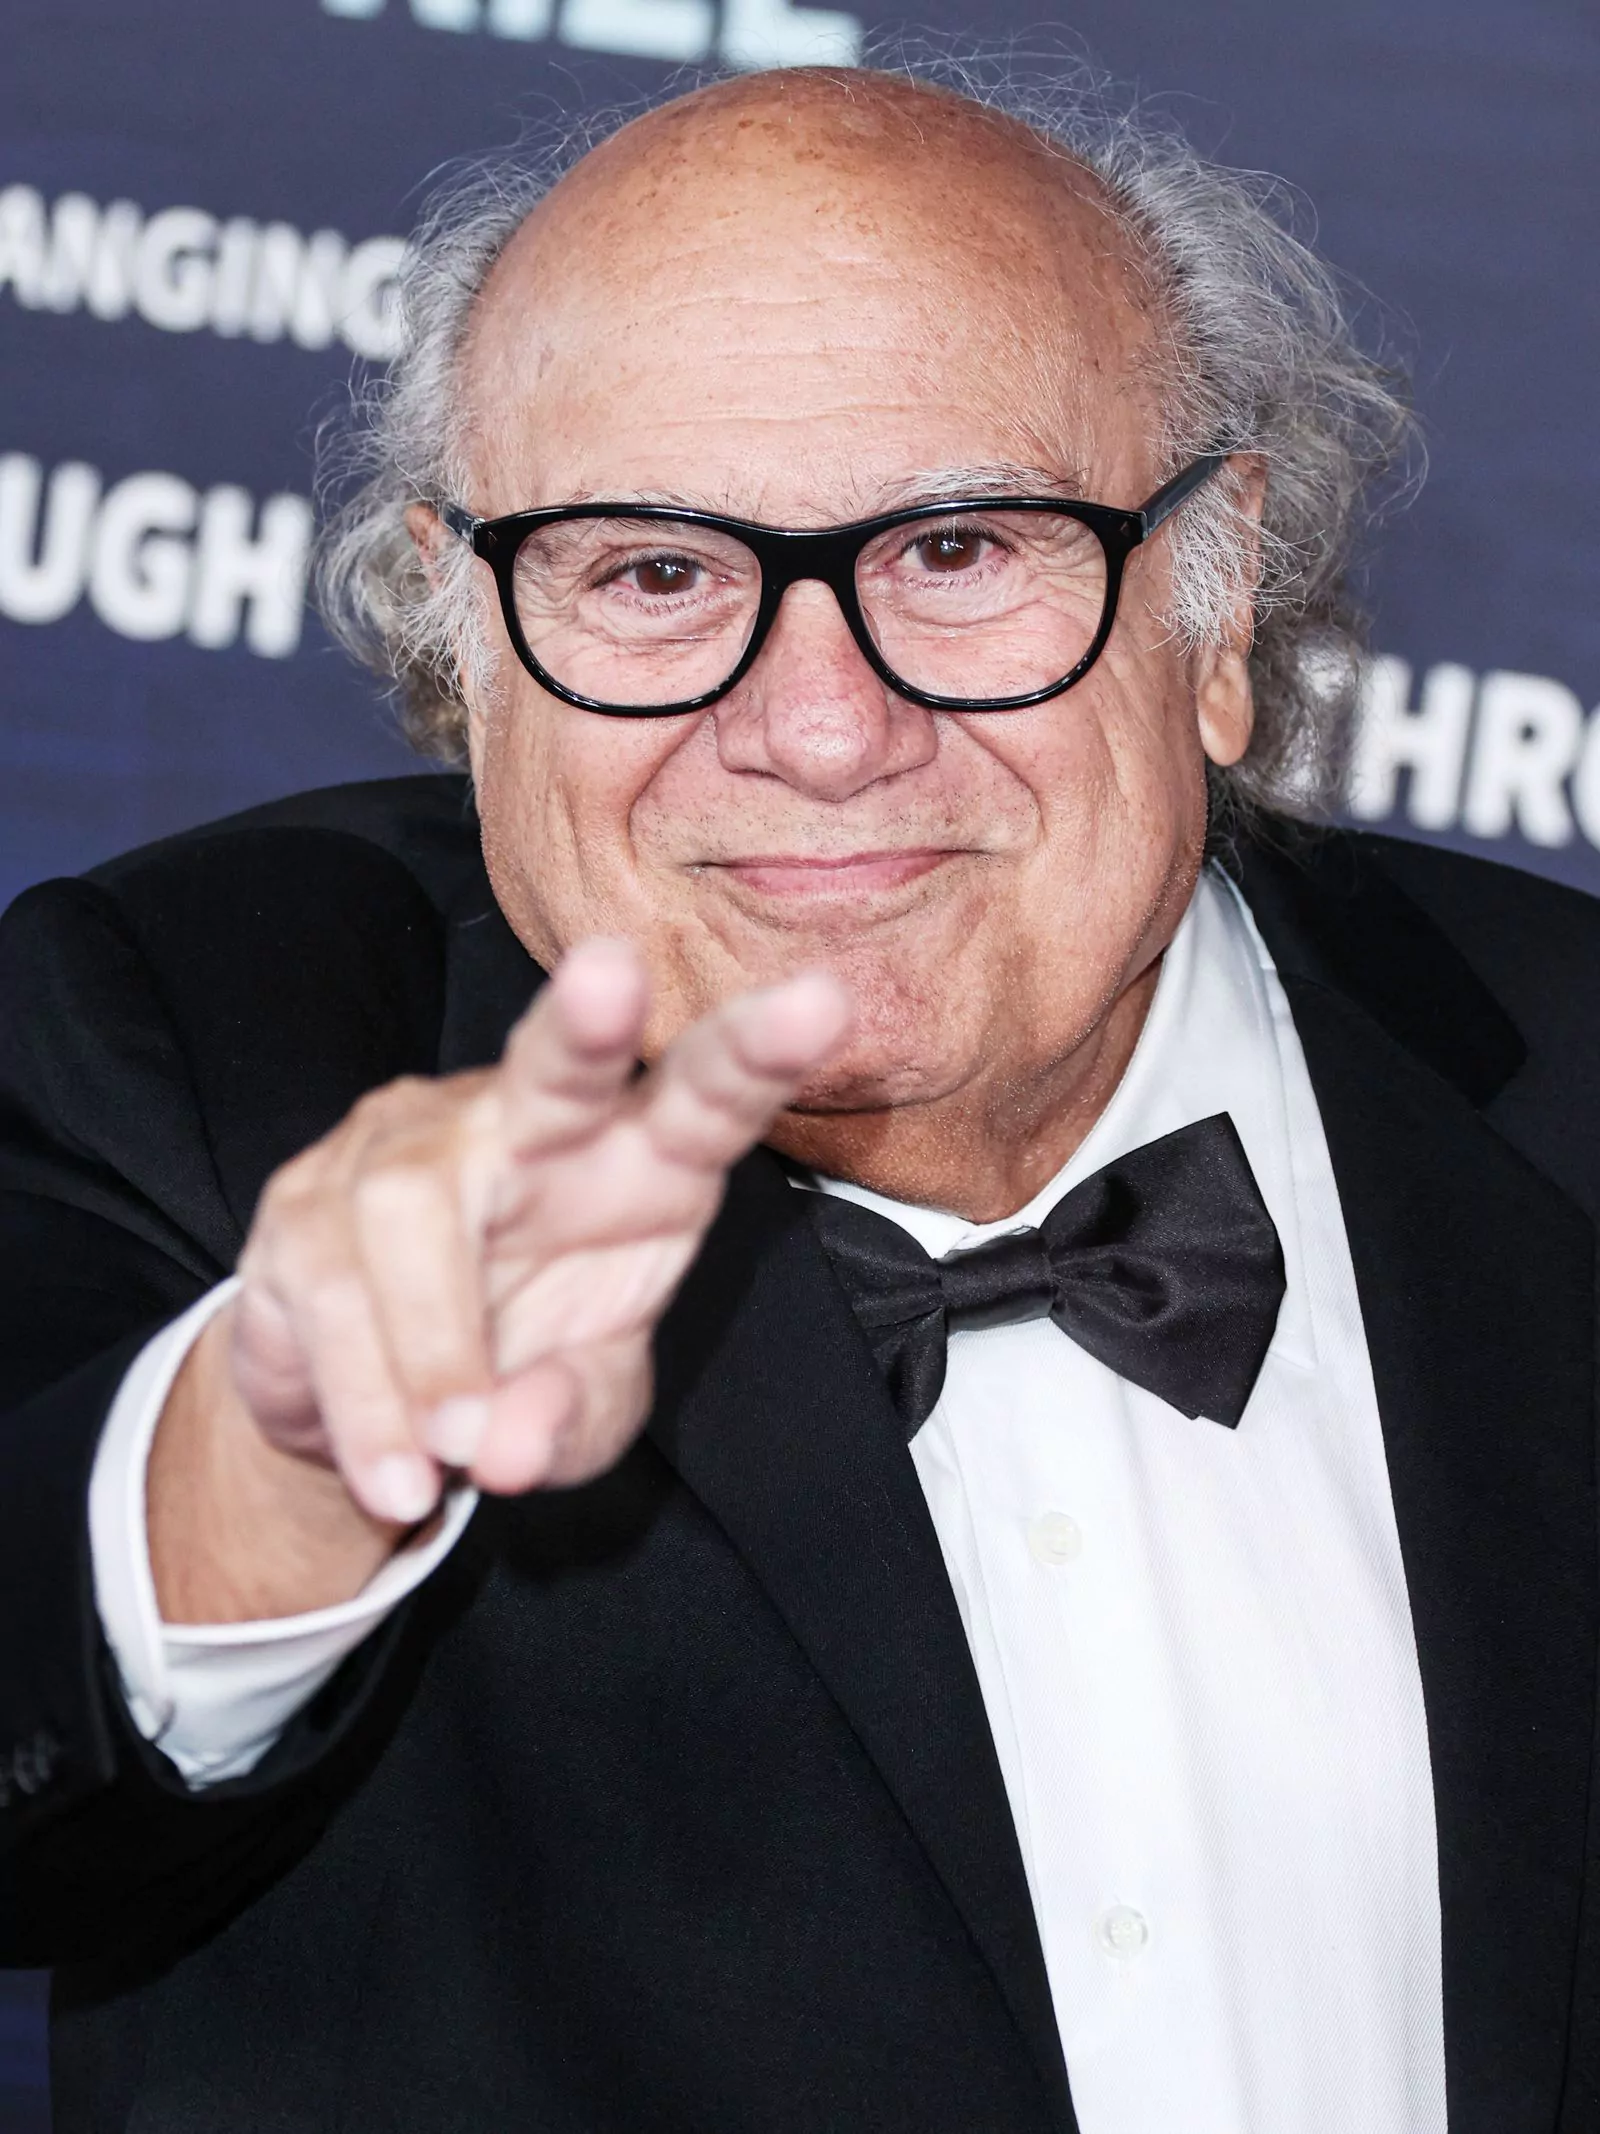 Danny DeVito at the 9th Annual Breakthrough Awards in Los Angeles on April 15, 2023.